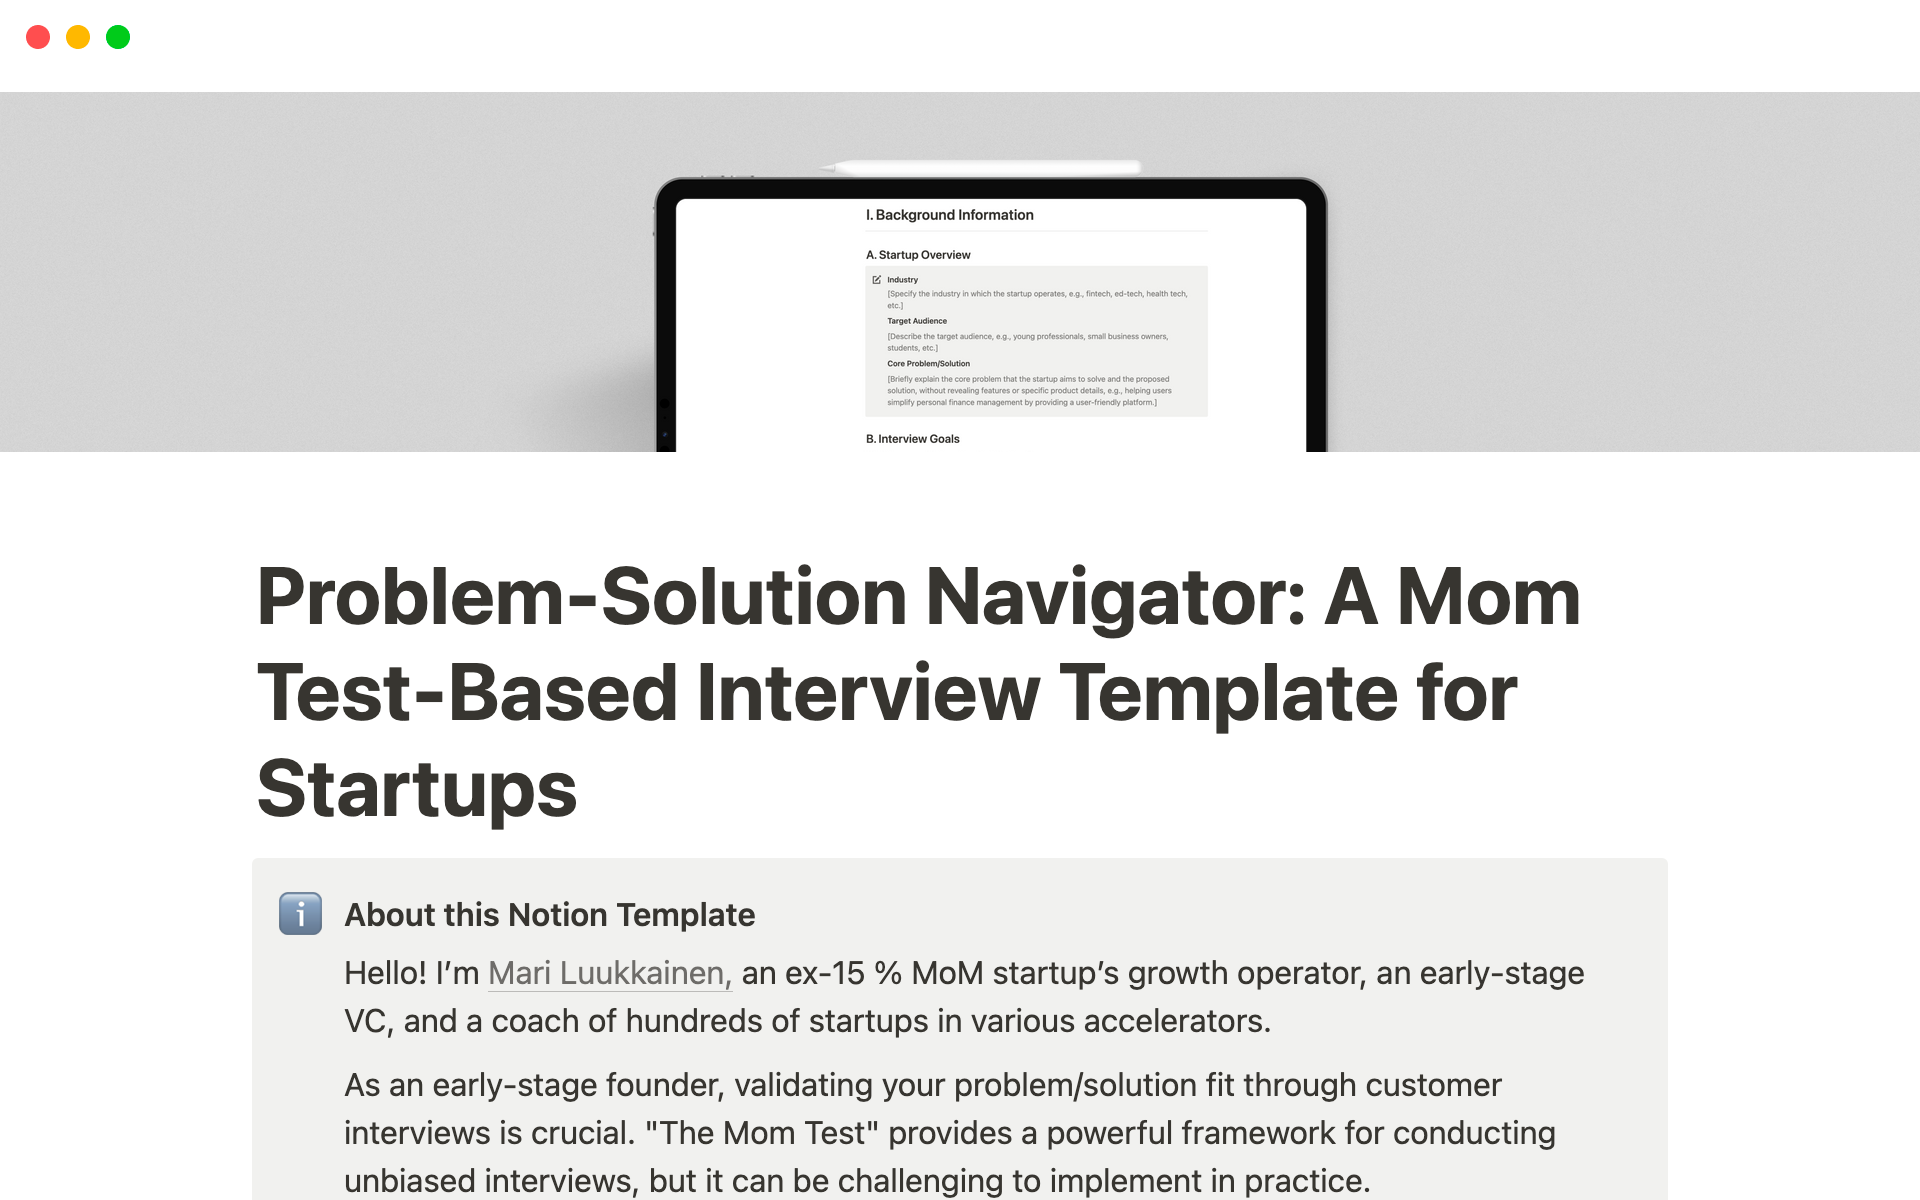 The template guides startups through the process of conducting unbiased, problem-focused customer interviews by following "The Mom Test" principles, helping them refine their problem/solution fit and better address their target audience's needs.